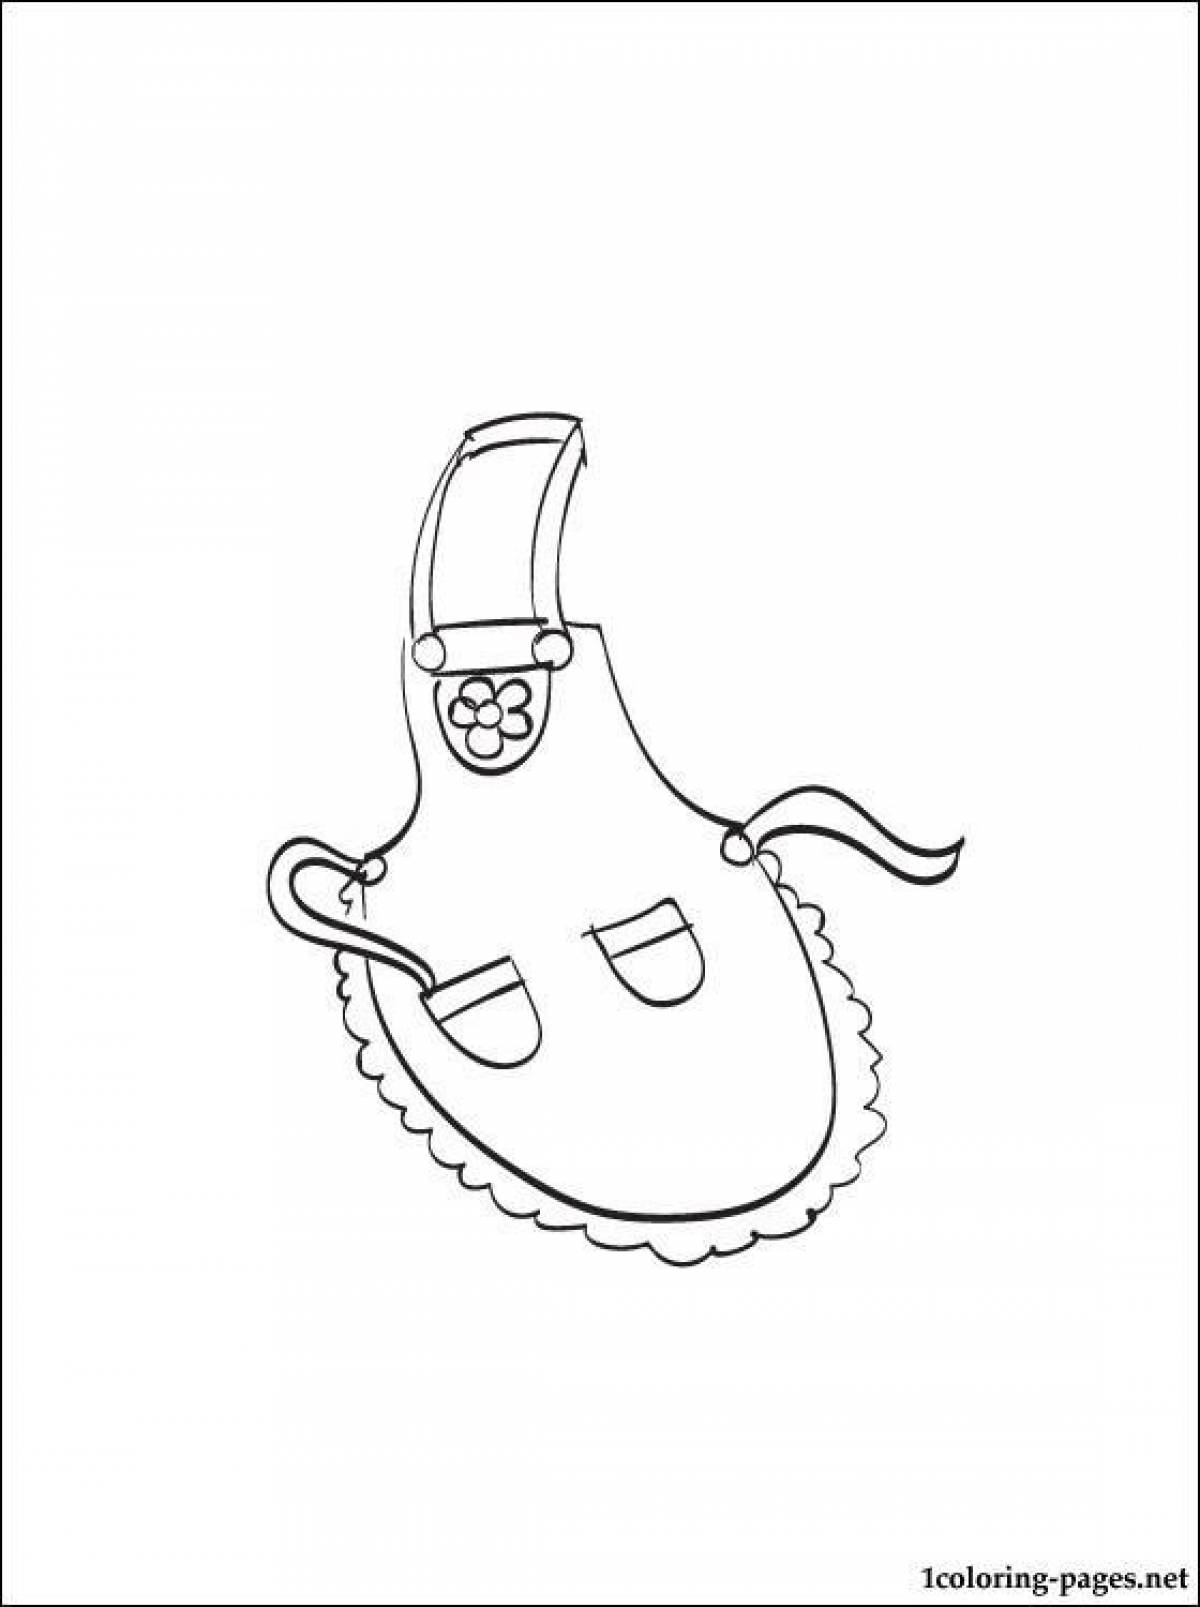 Majestic apron coloring page